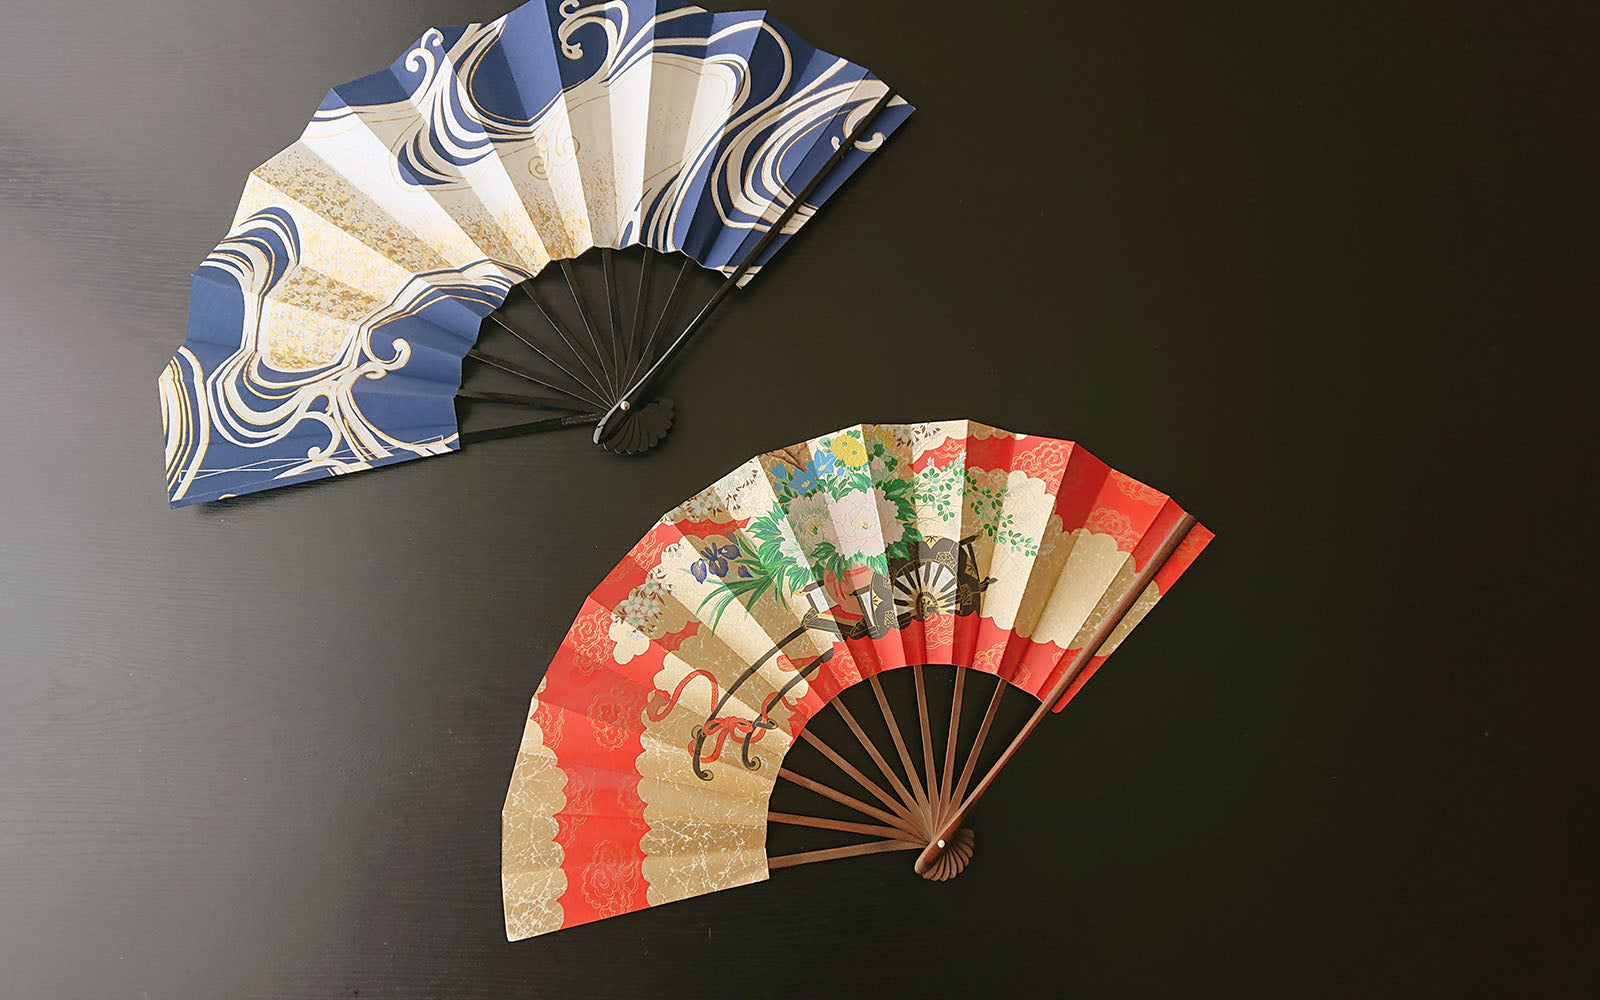 Stay cool and relax with Japanese way Ver.4 "Folding fan for dance and decoration"